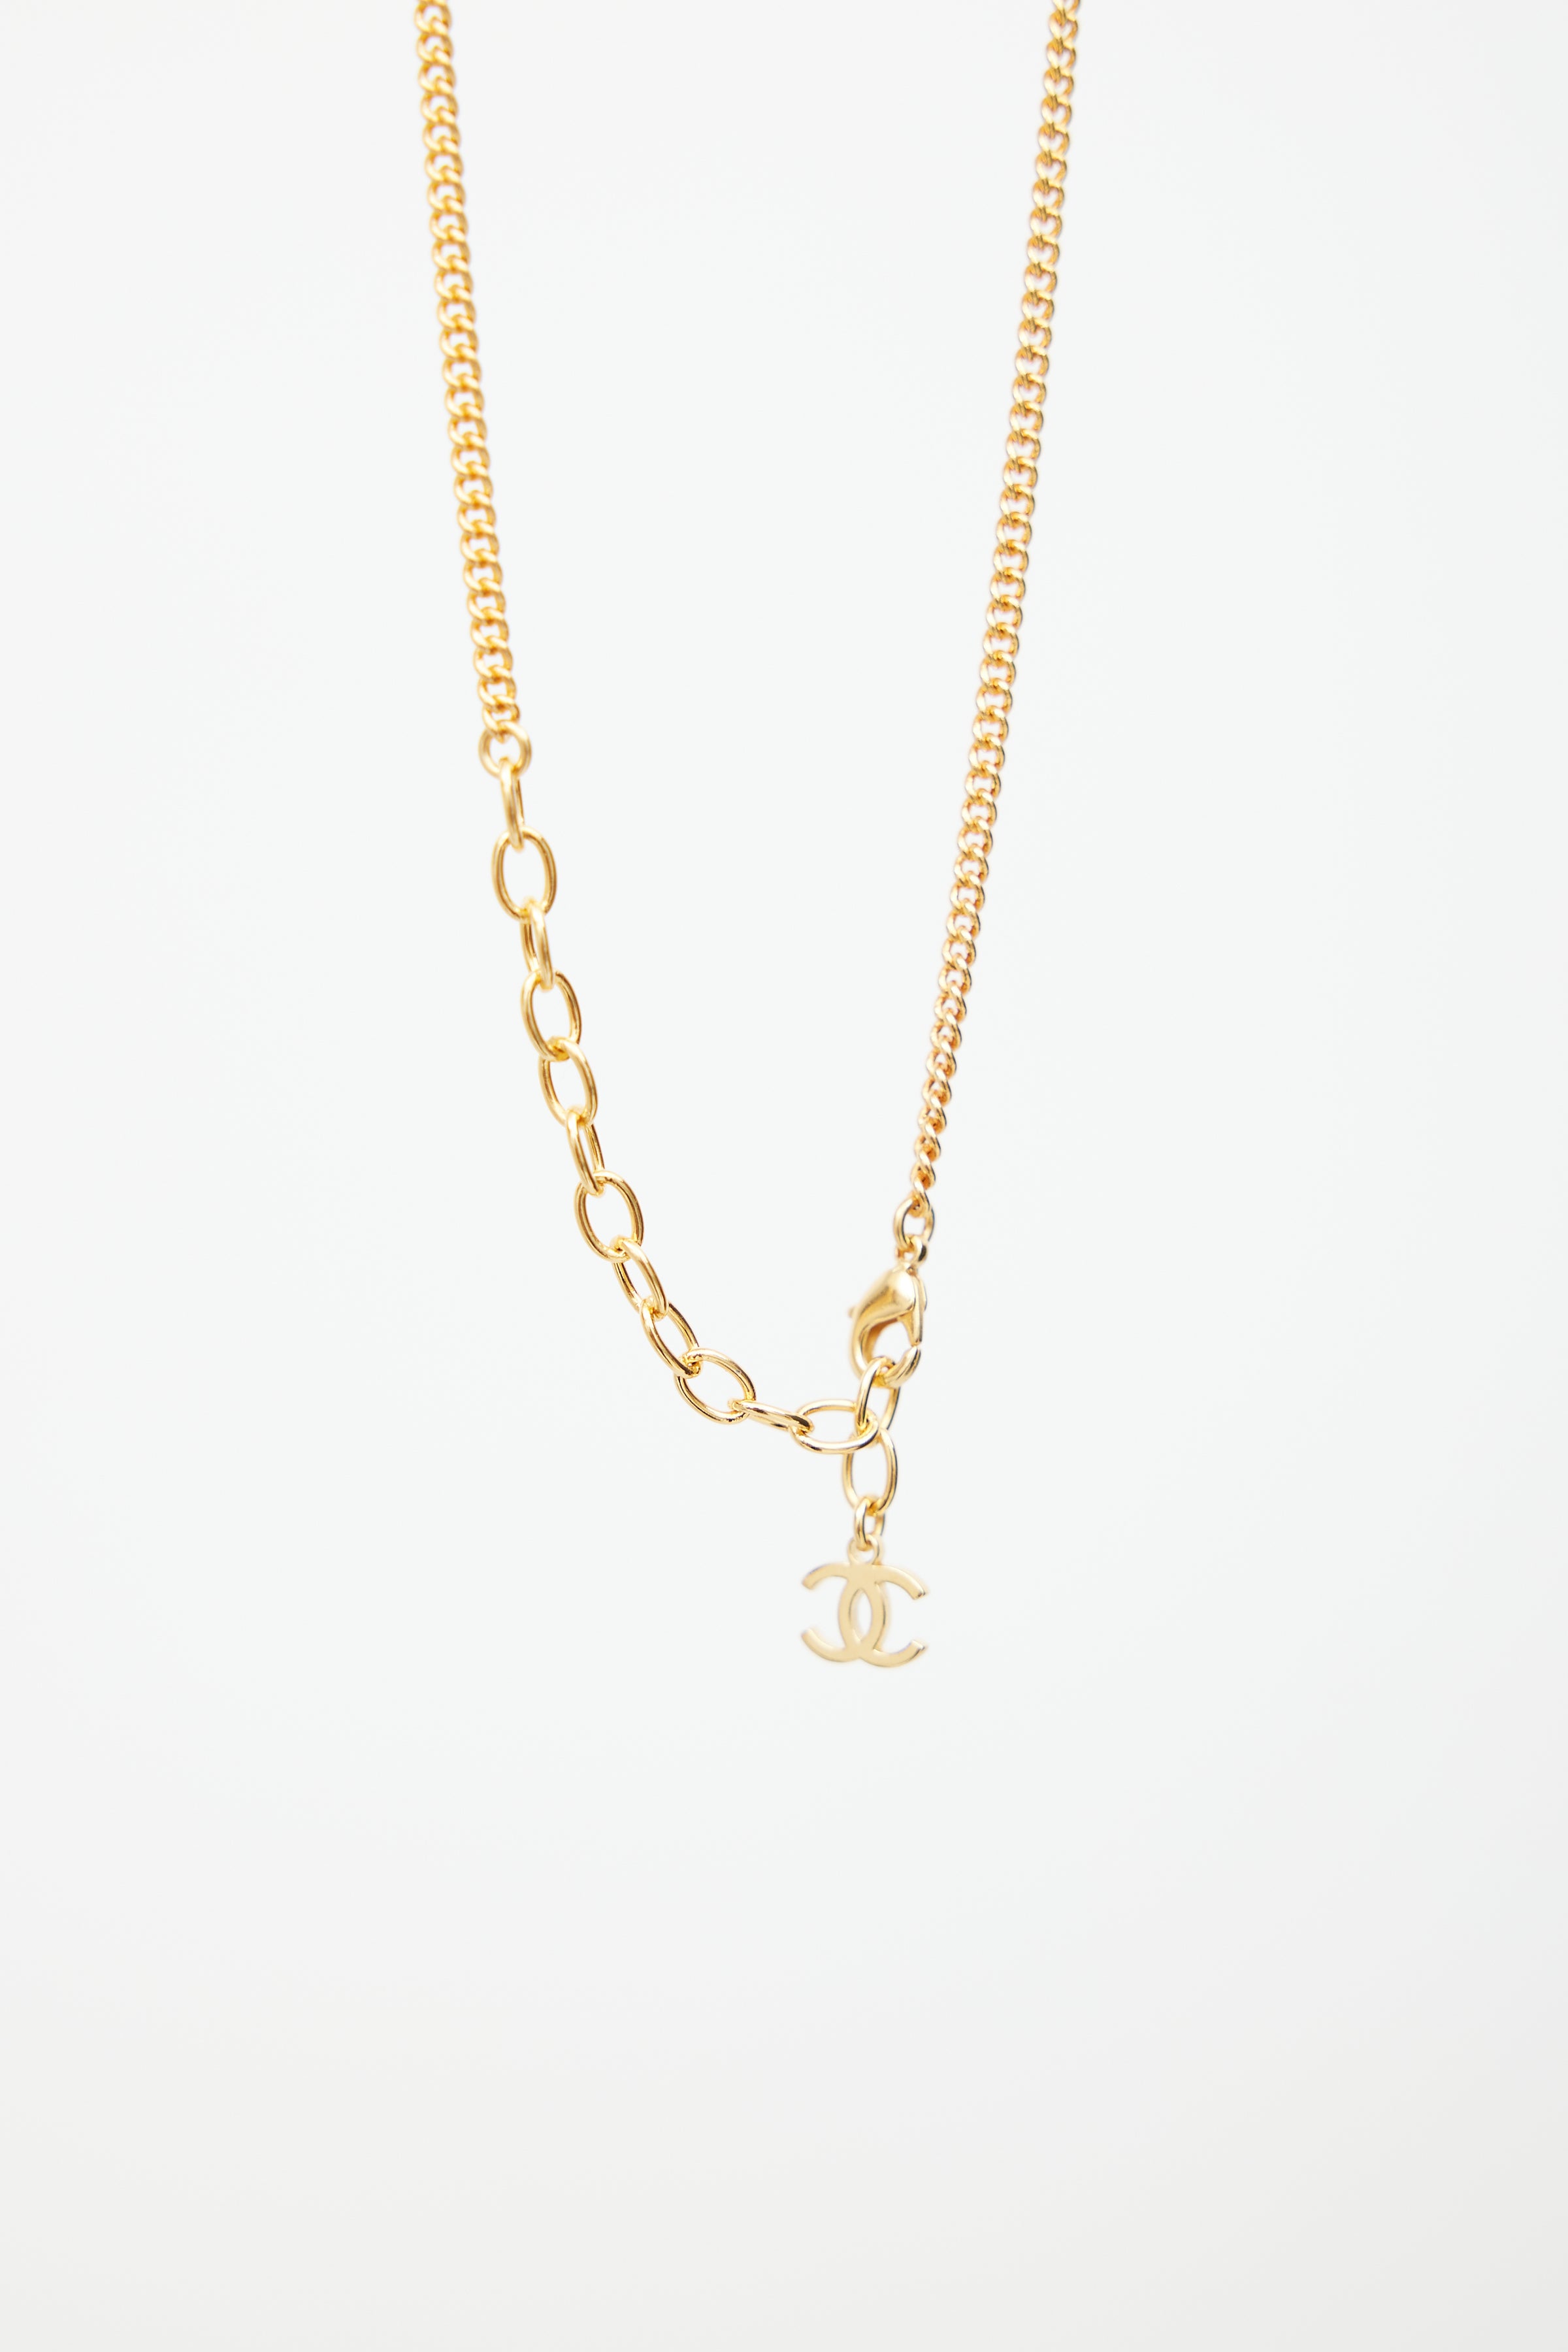 chanel necklace womens pendant